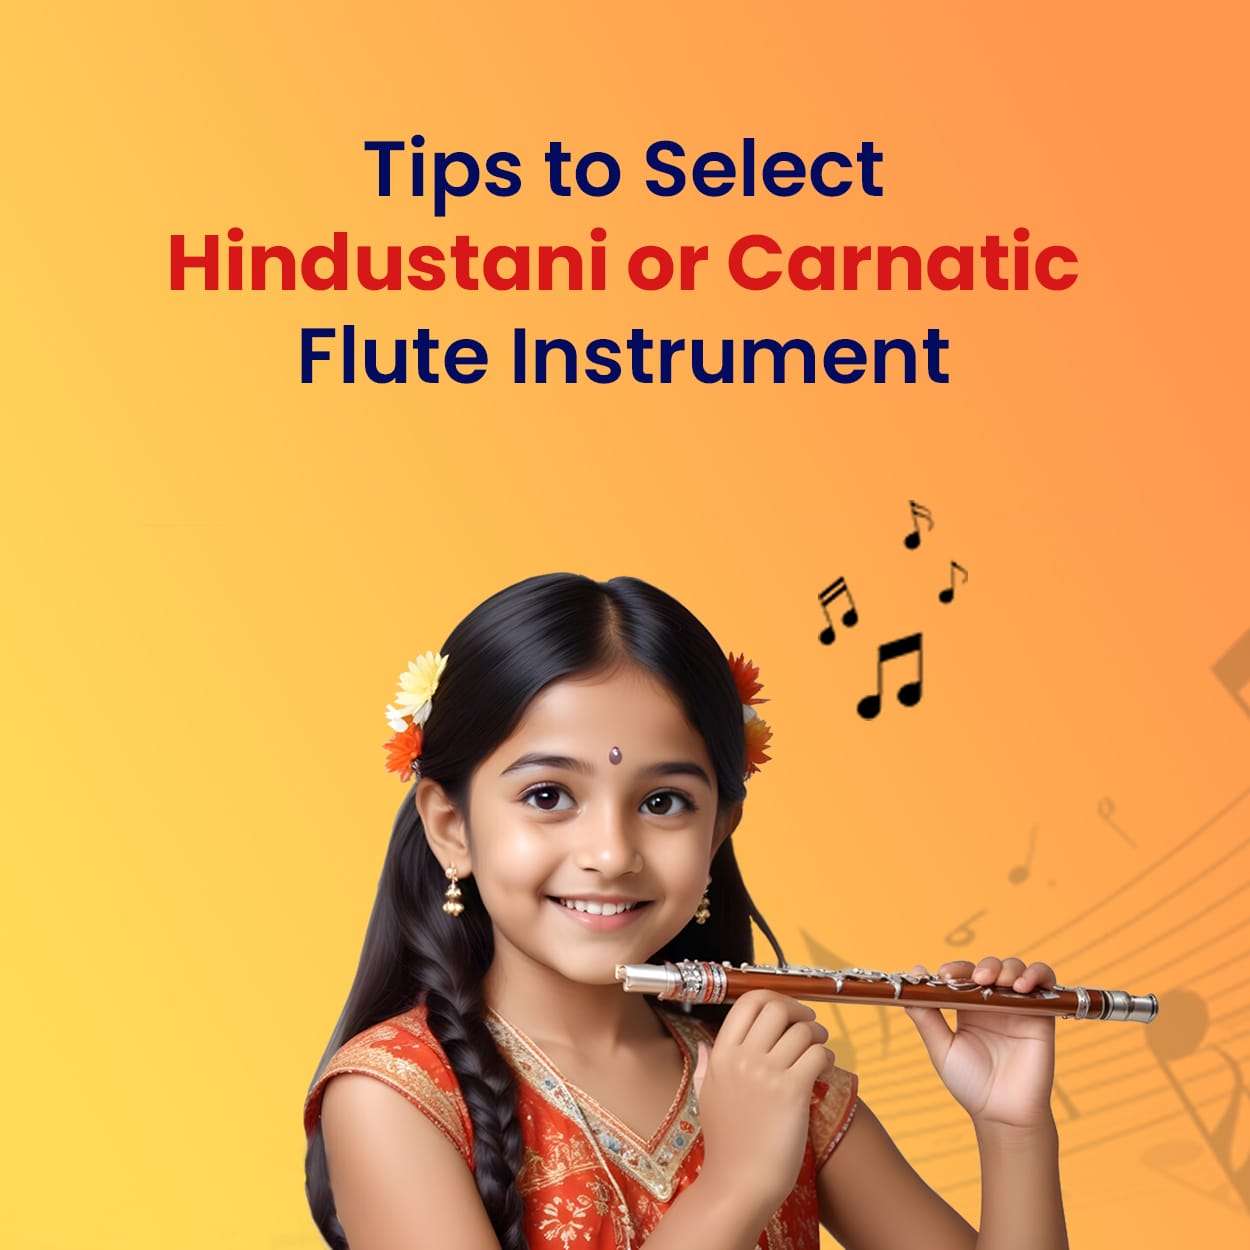 Tips to Select Hindustani or Carnatic Flute Instrument